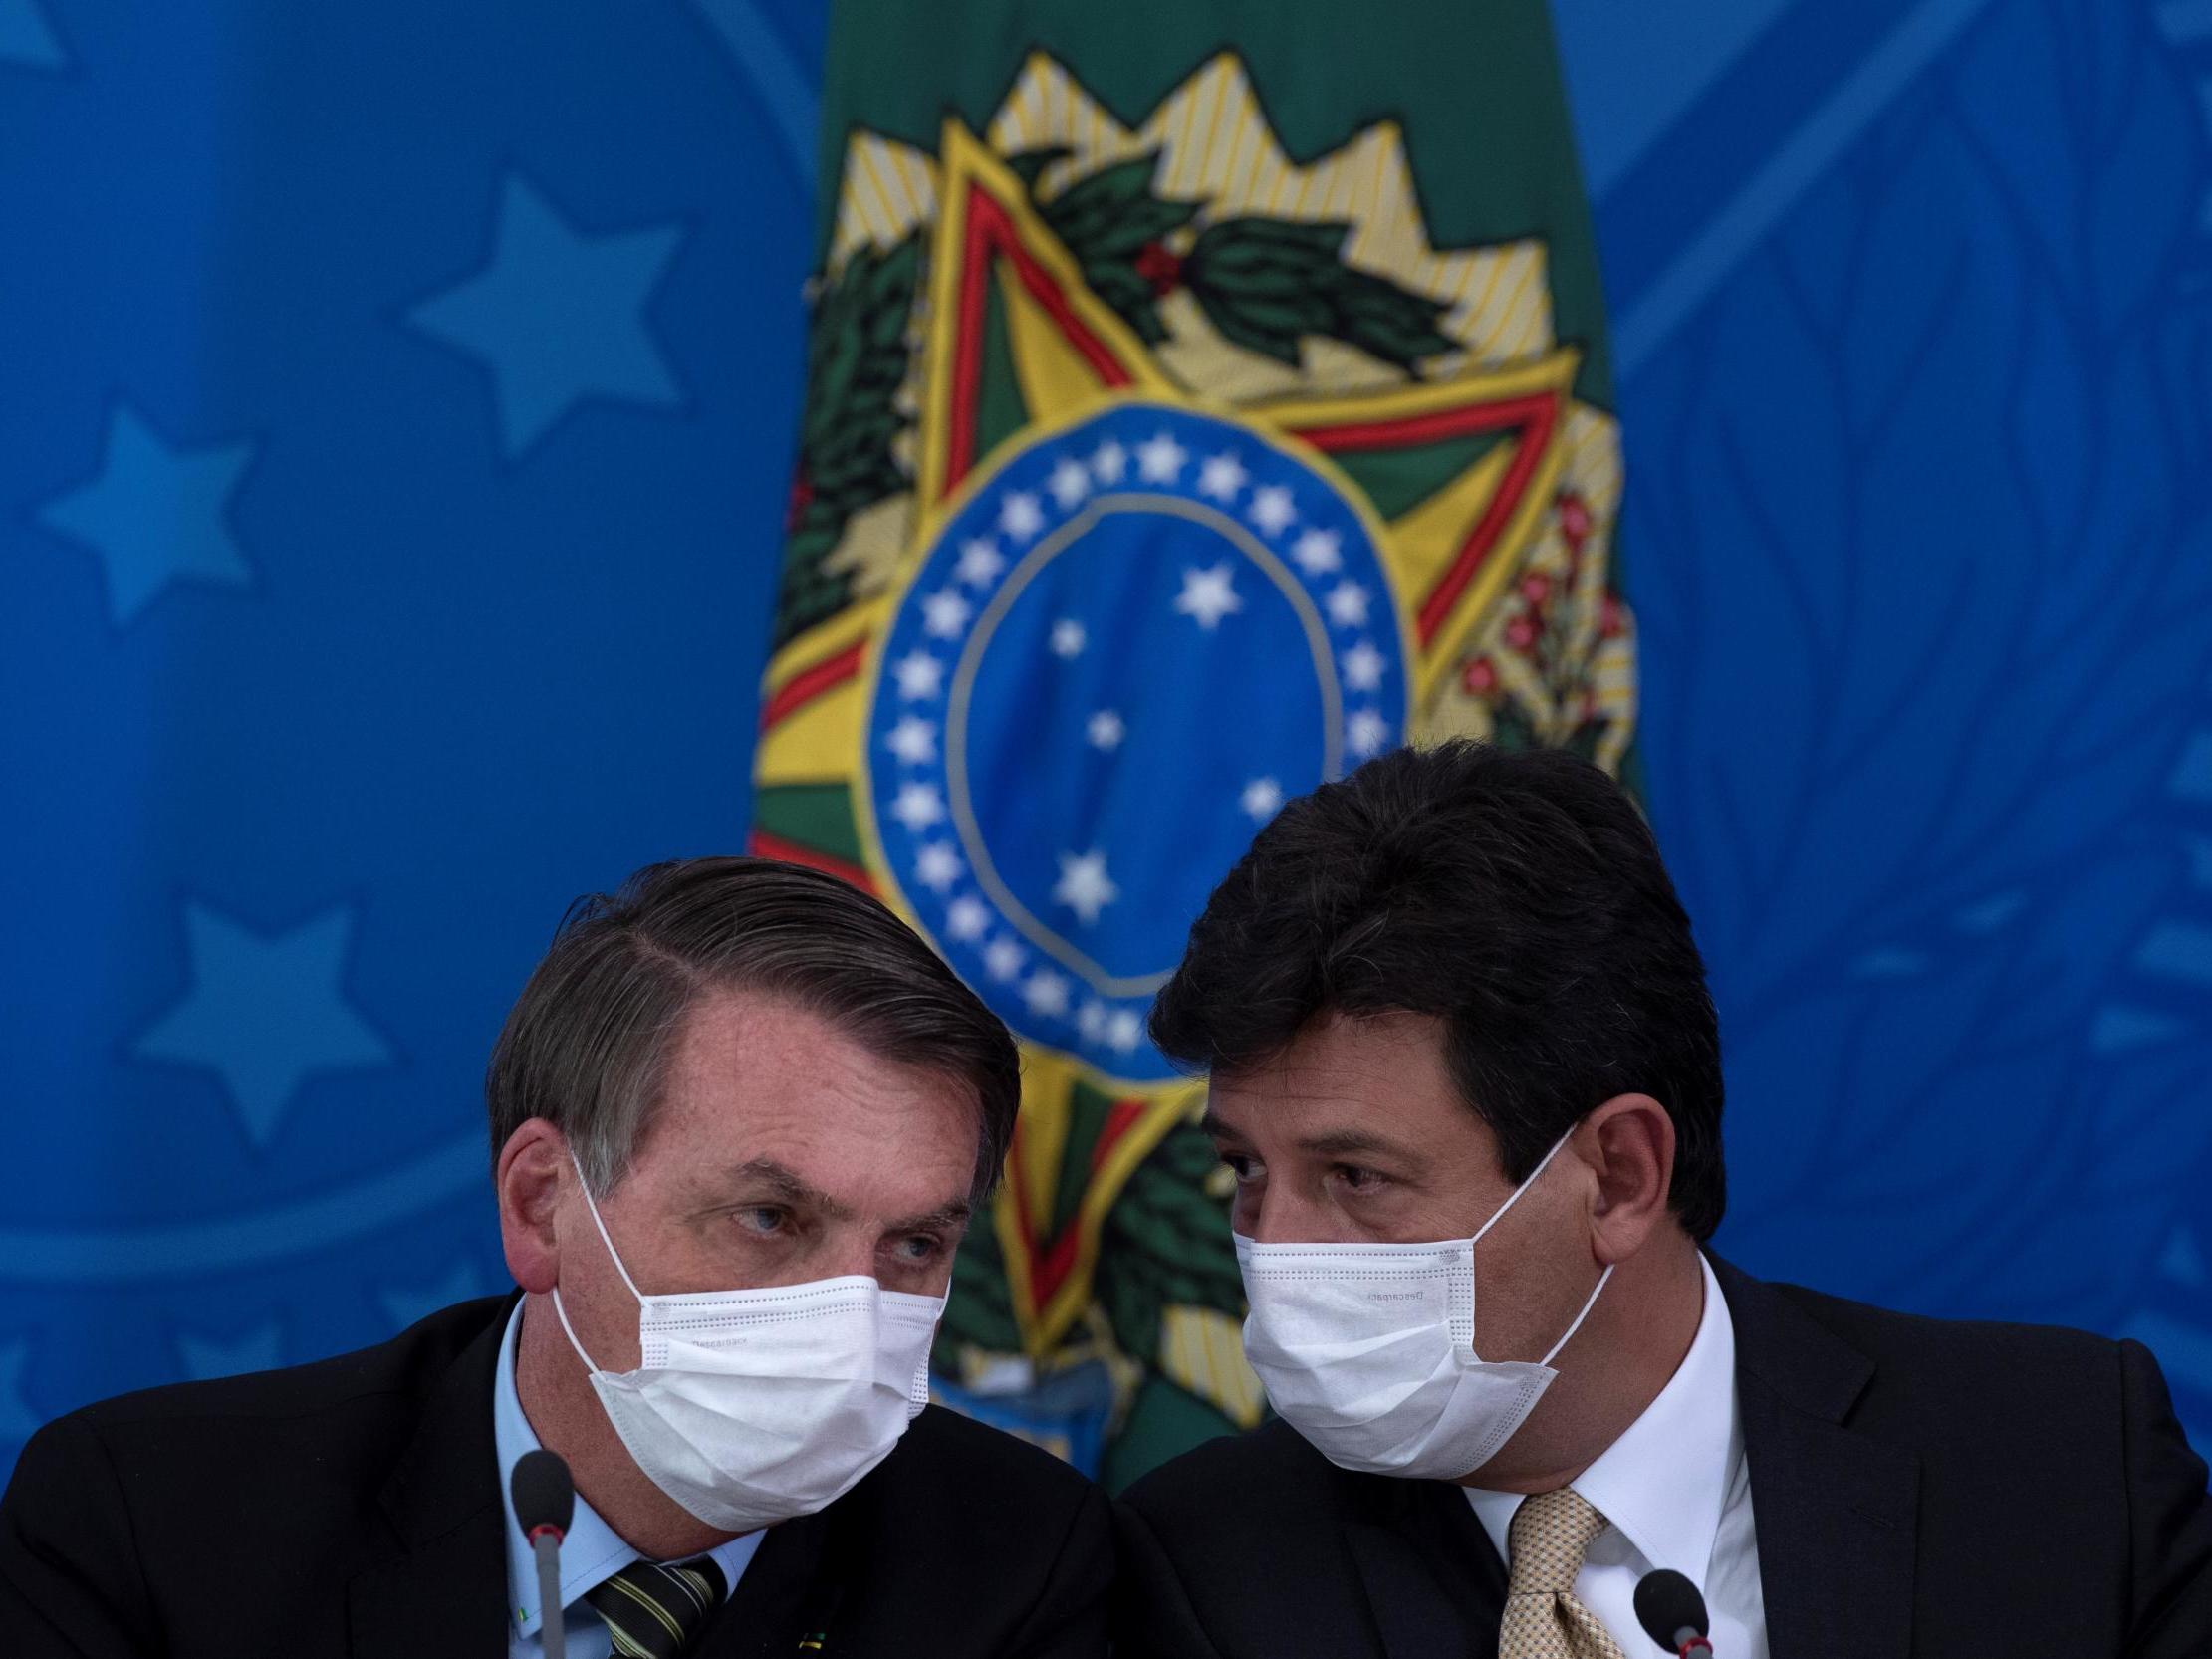 President of Brazil Jair Bolsonaro and then Minister of Health Luiz Henrique Mandetta attend a press conference on the measures taken by the government against the spread of the coronavirus